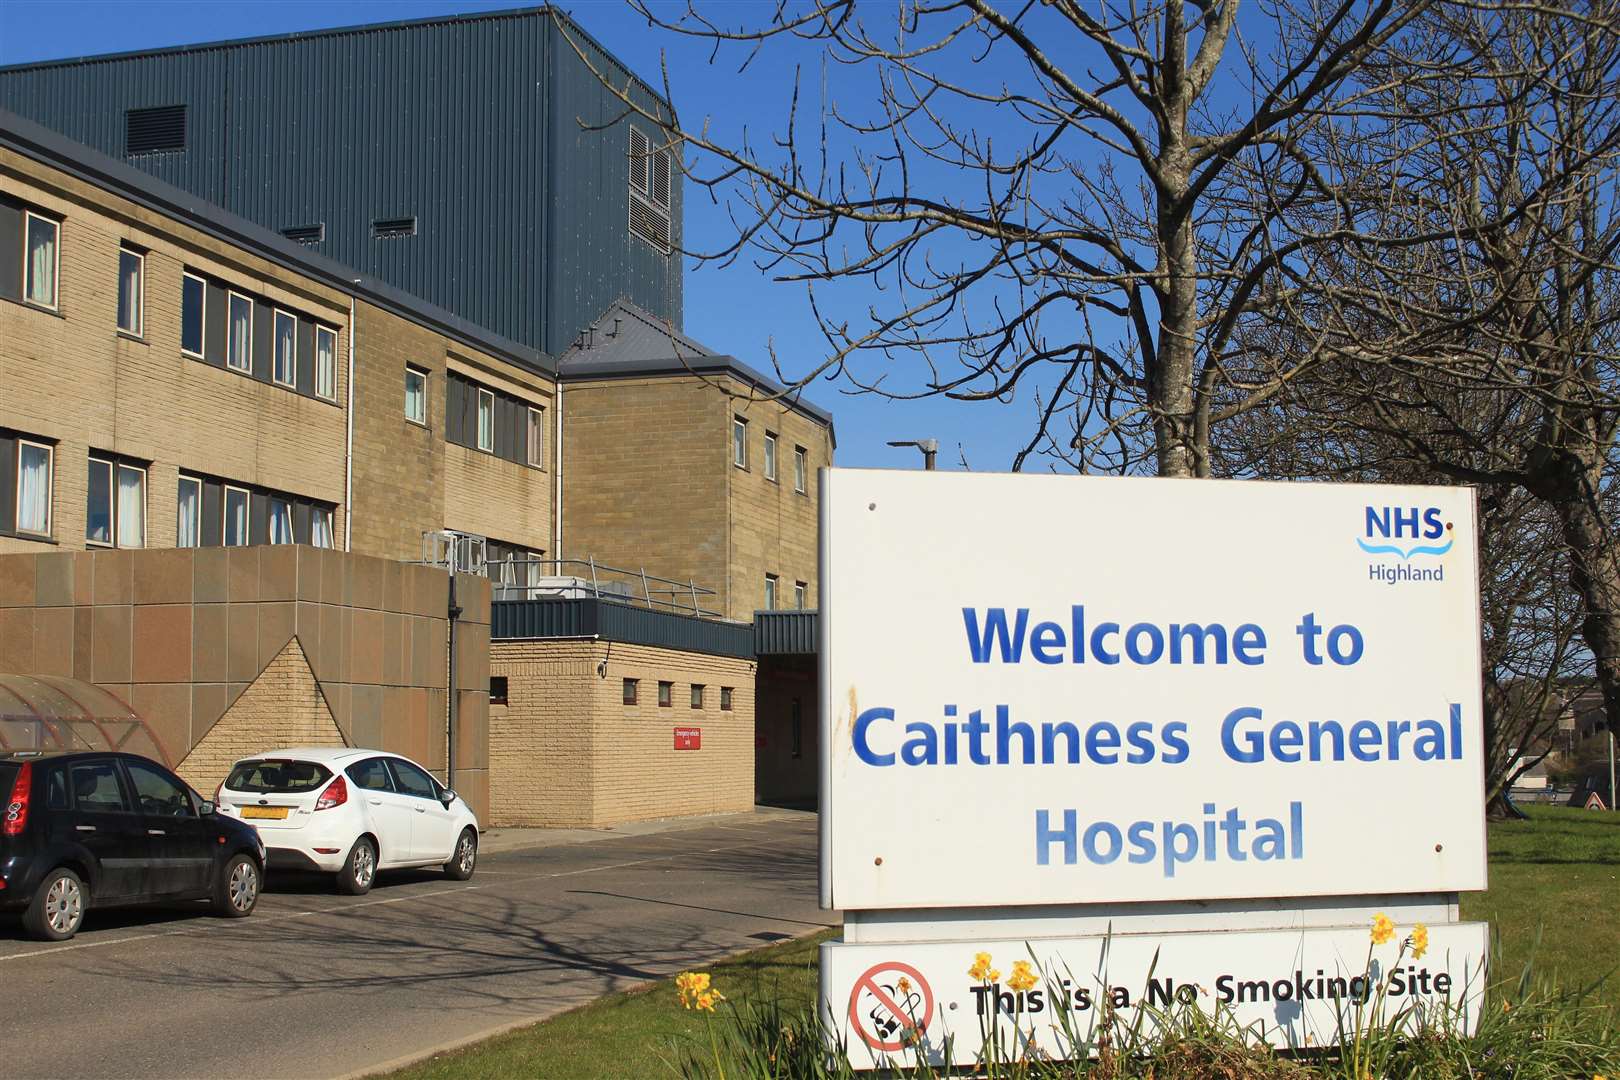 NHS Highland said all appropriate infection prevention and control measures had been put in place at Caithness General Hospital.